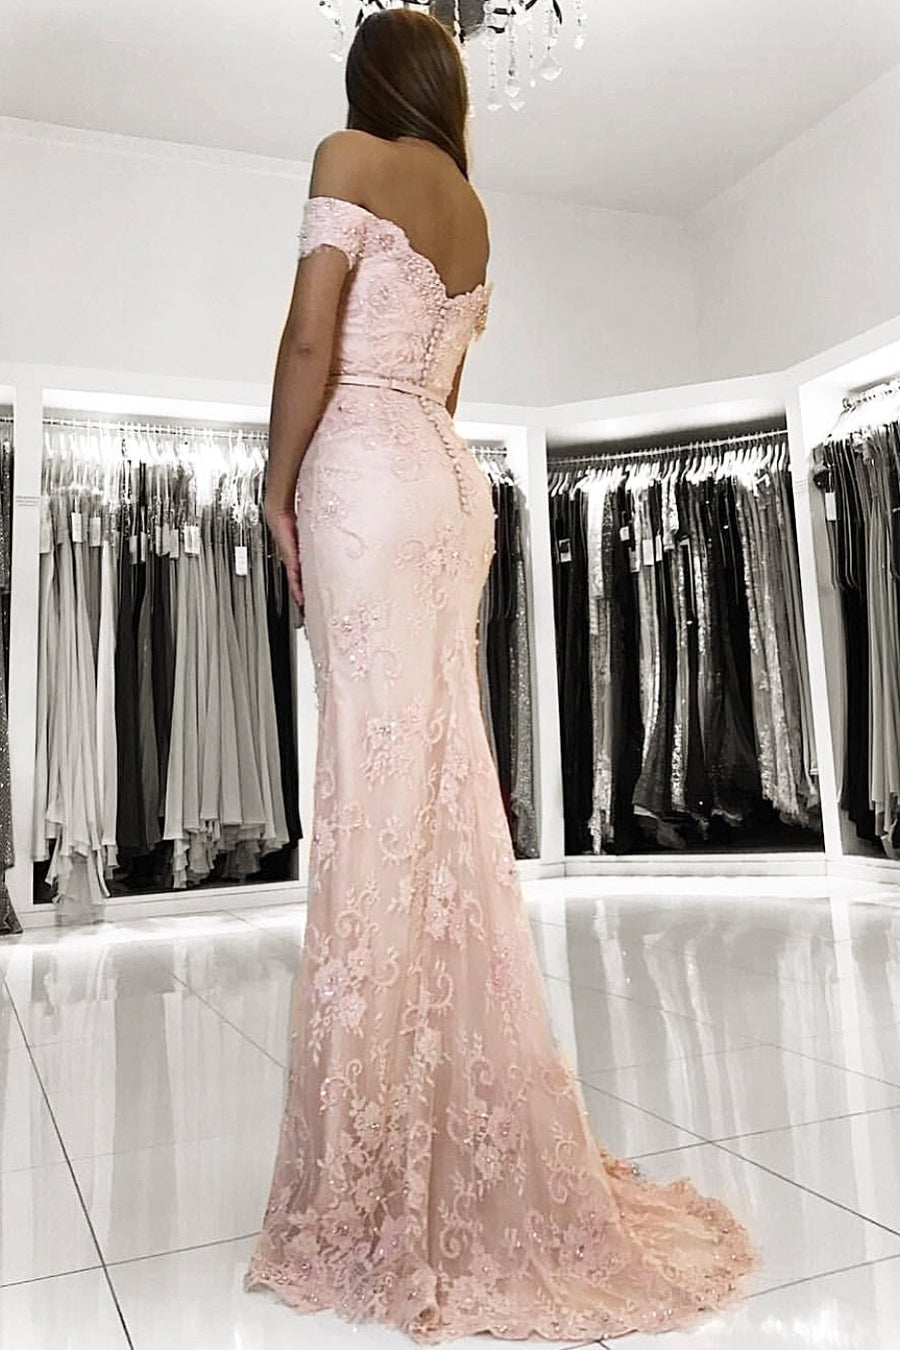 Long Mermaid Off-the-shoulder Backless Appliques Lace Prom Dress-BIZTUNNEL